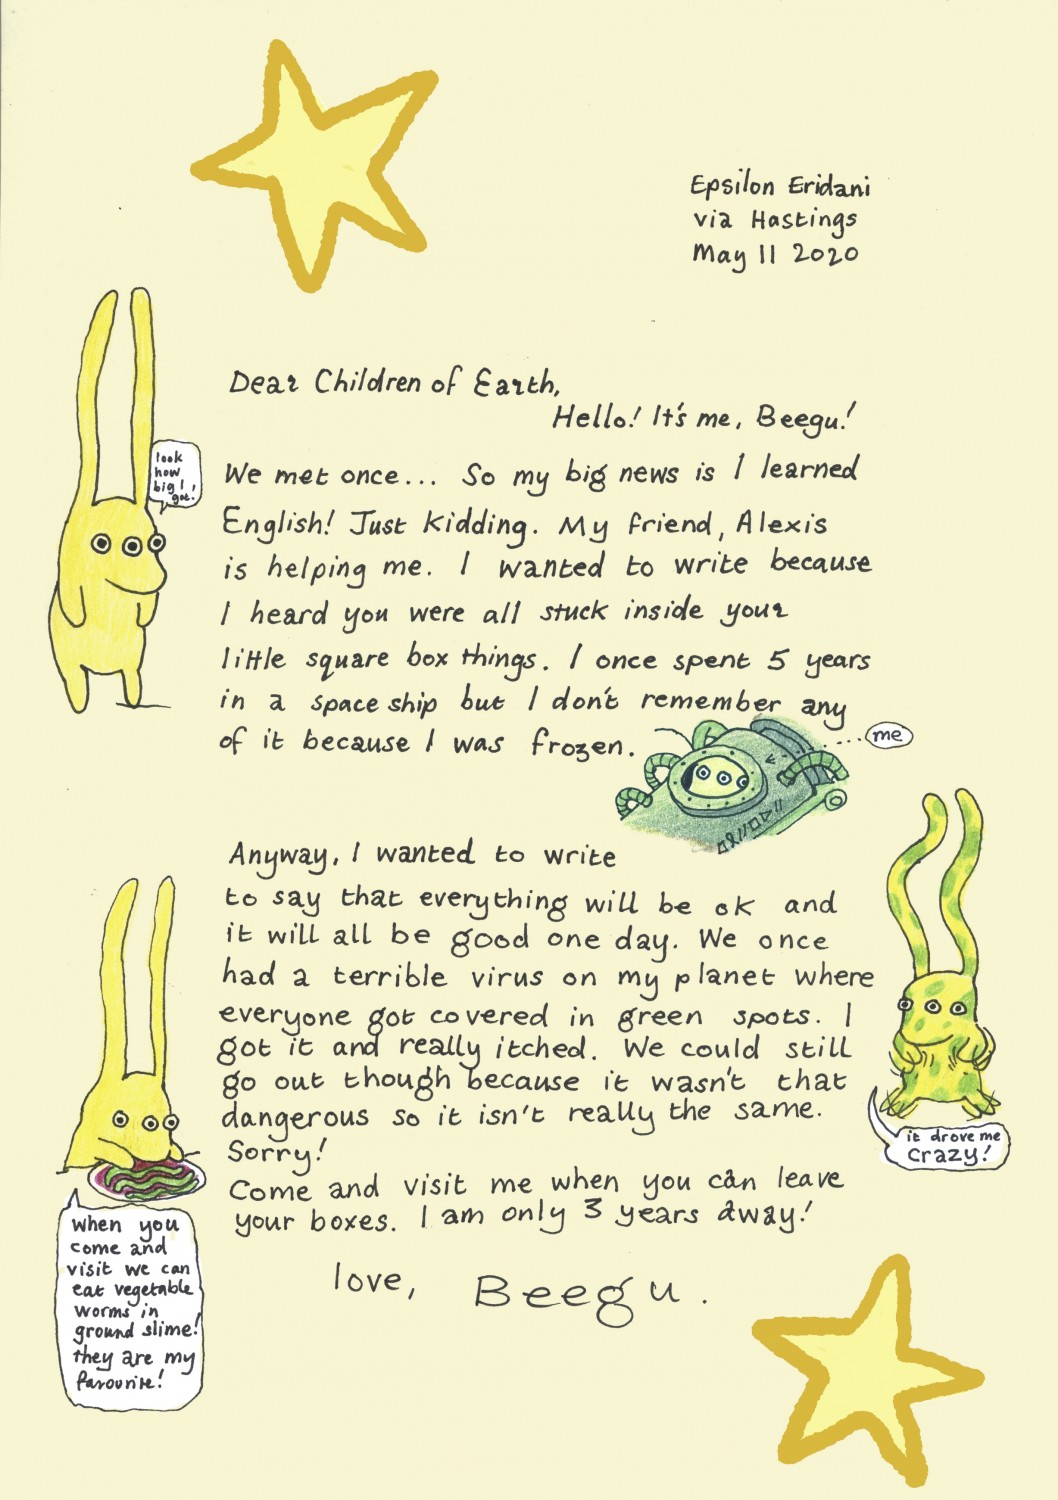 Dear Children of Earth, Hello! It's me, Beegu! We met once... So my big news is I learned English! Just kidding. My friend, Alexis is helping me. I wanted to write because I heard you were all stuck inside your little square box things. I once spent 5 years in a spaceship but I don't remember any of it because I was frozen. Anyway, I wanted to write to say that everything will be ok and it will all be good one day. We once had a terrible virus on my planet where everyone got covered in green spots. I got it and really itched. We could still go out though because it wasn;t that dangerous so it isn't really the same. Sorry! Come and visit me when you can leave your boxes. I am only 3 years away! Love, Beegu